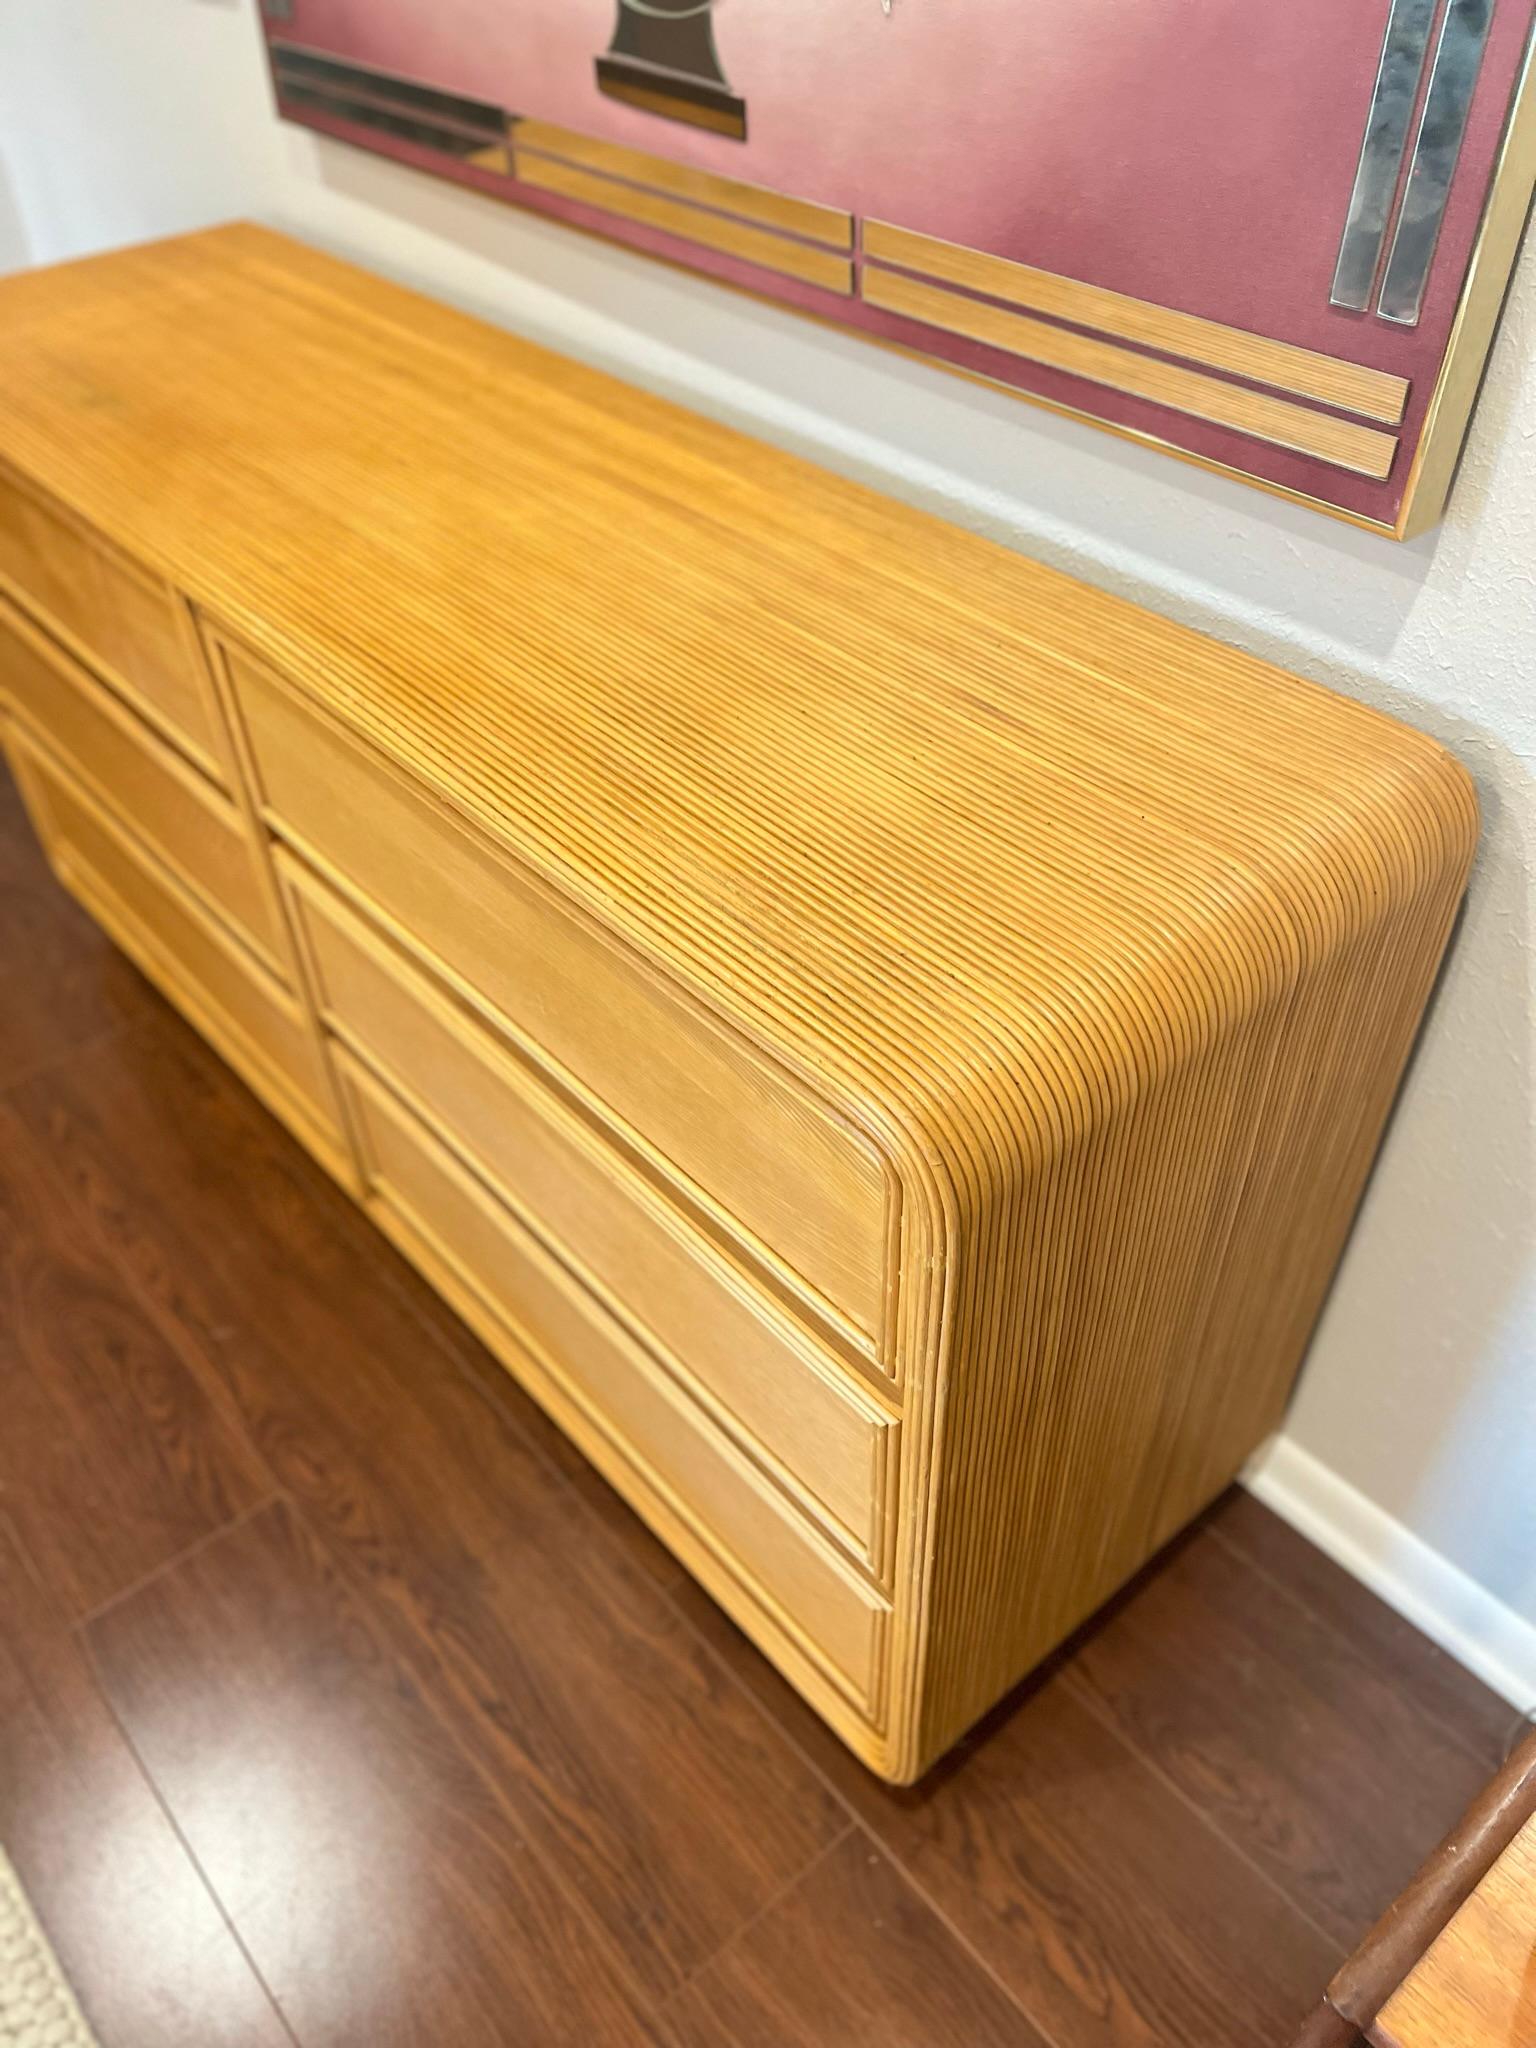 Vintage midcentury 6 drawer dresser veneered in split reed bamboo in the manner of Gabriella Crespi. 
So excited to acquire another one of these. In very good condition. All drawers open and close smoothly. Notice one small mark on the surface, it